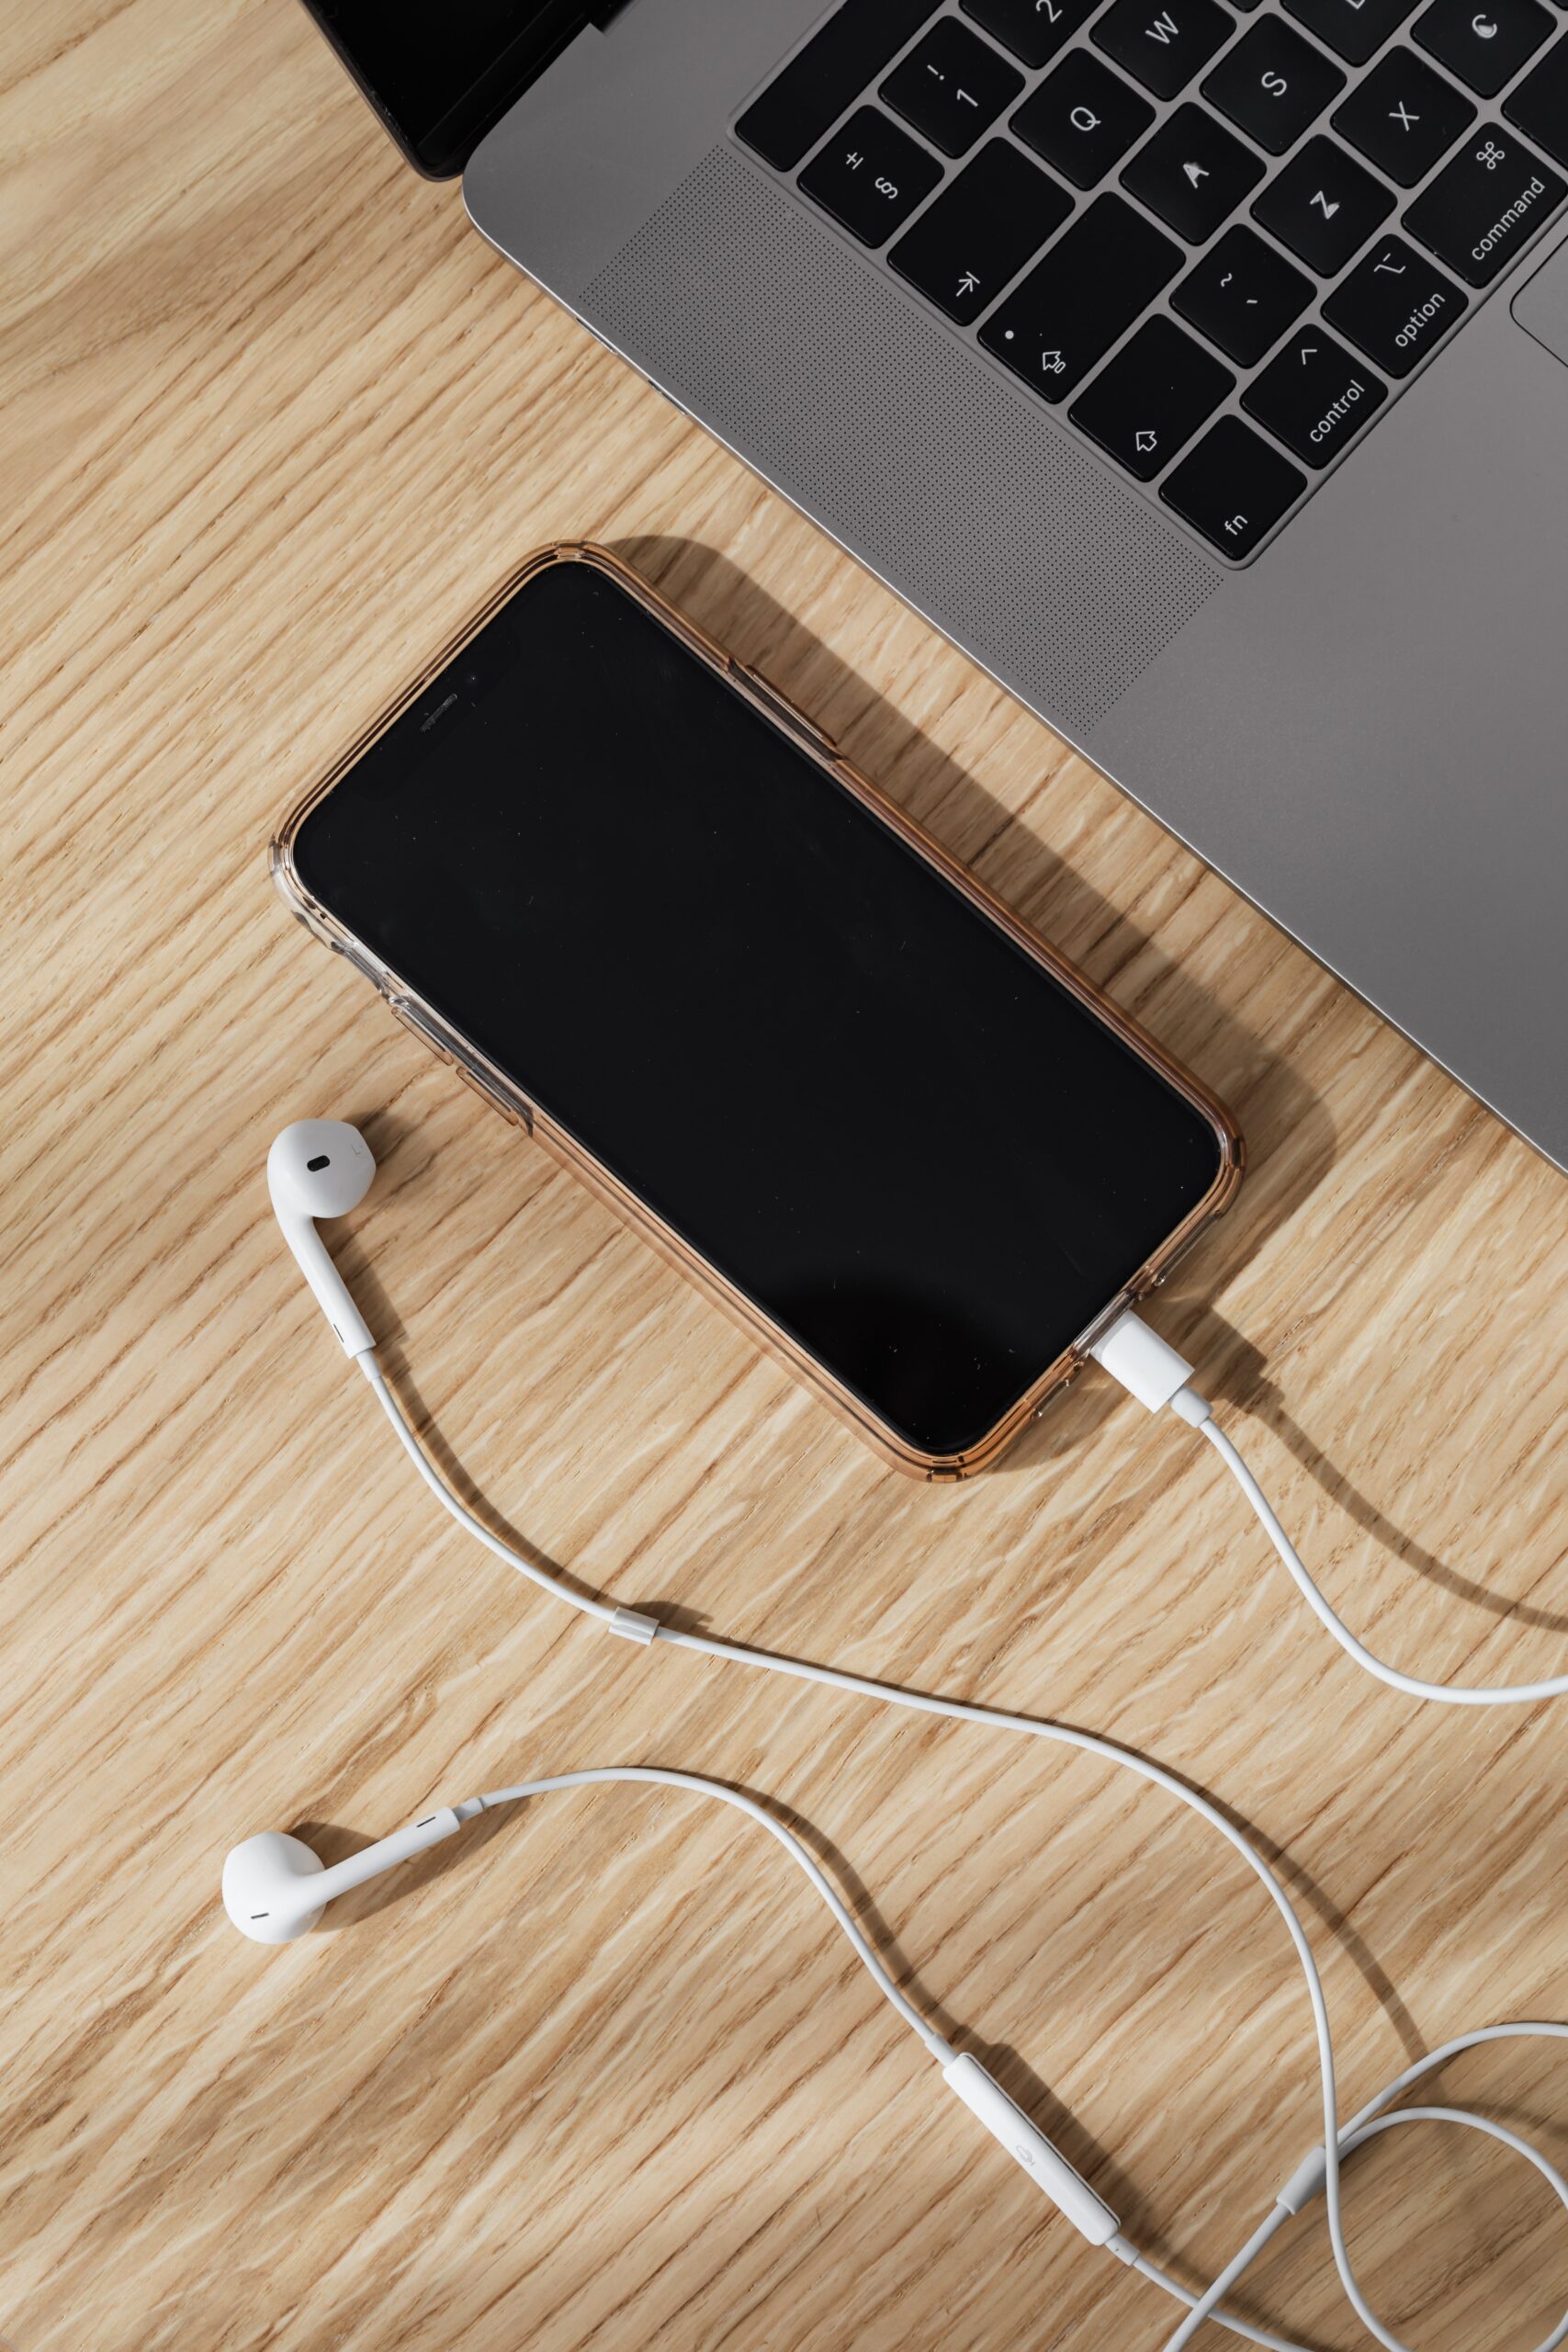 A photo of an iPhone with wired headphones and a laptop on a desk.